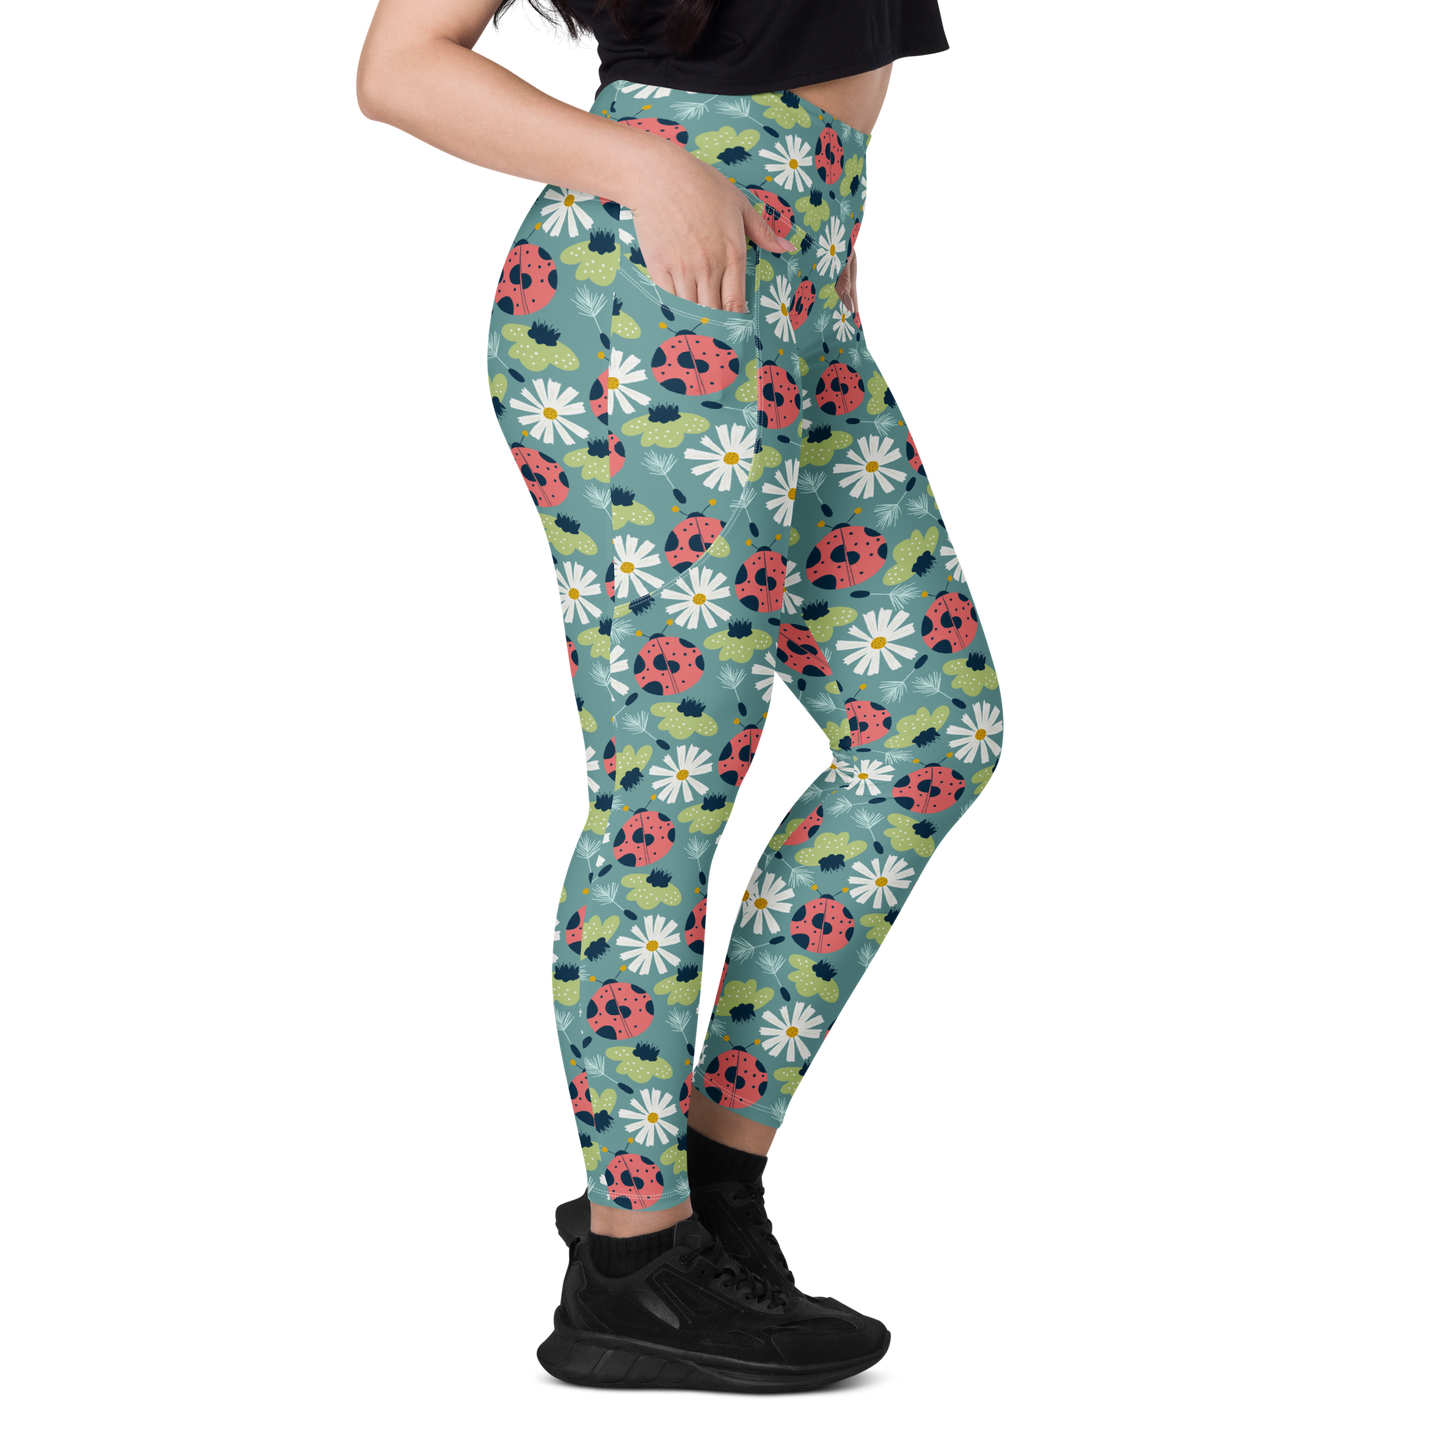 Scandinavian Spring Floral | Seamless Patterns | All-Over Print Leggings with Pockets - #2